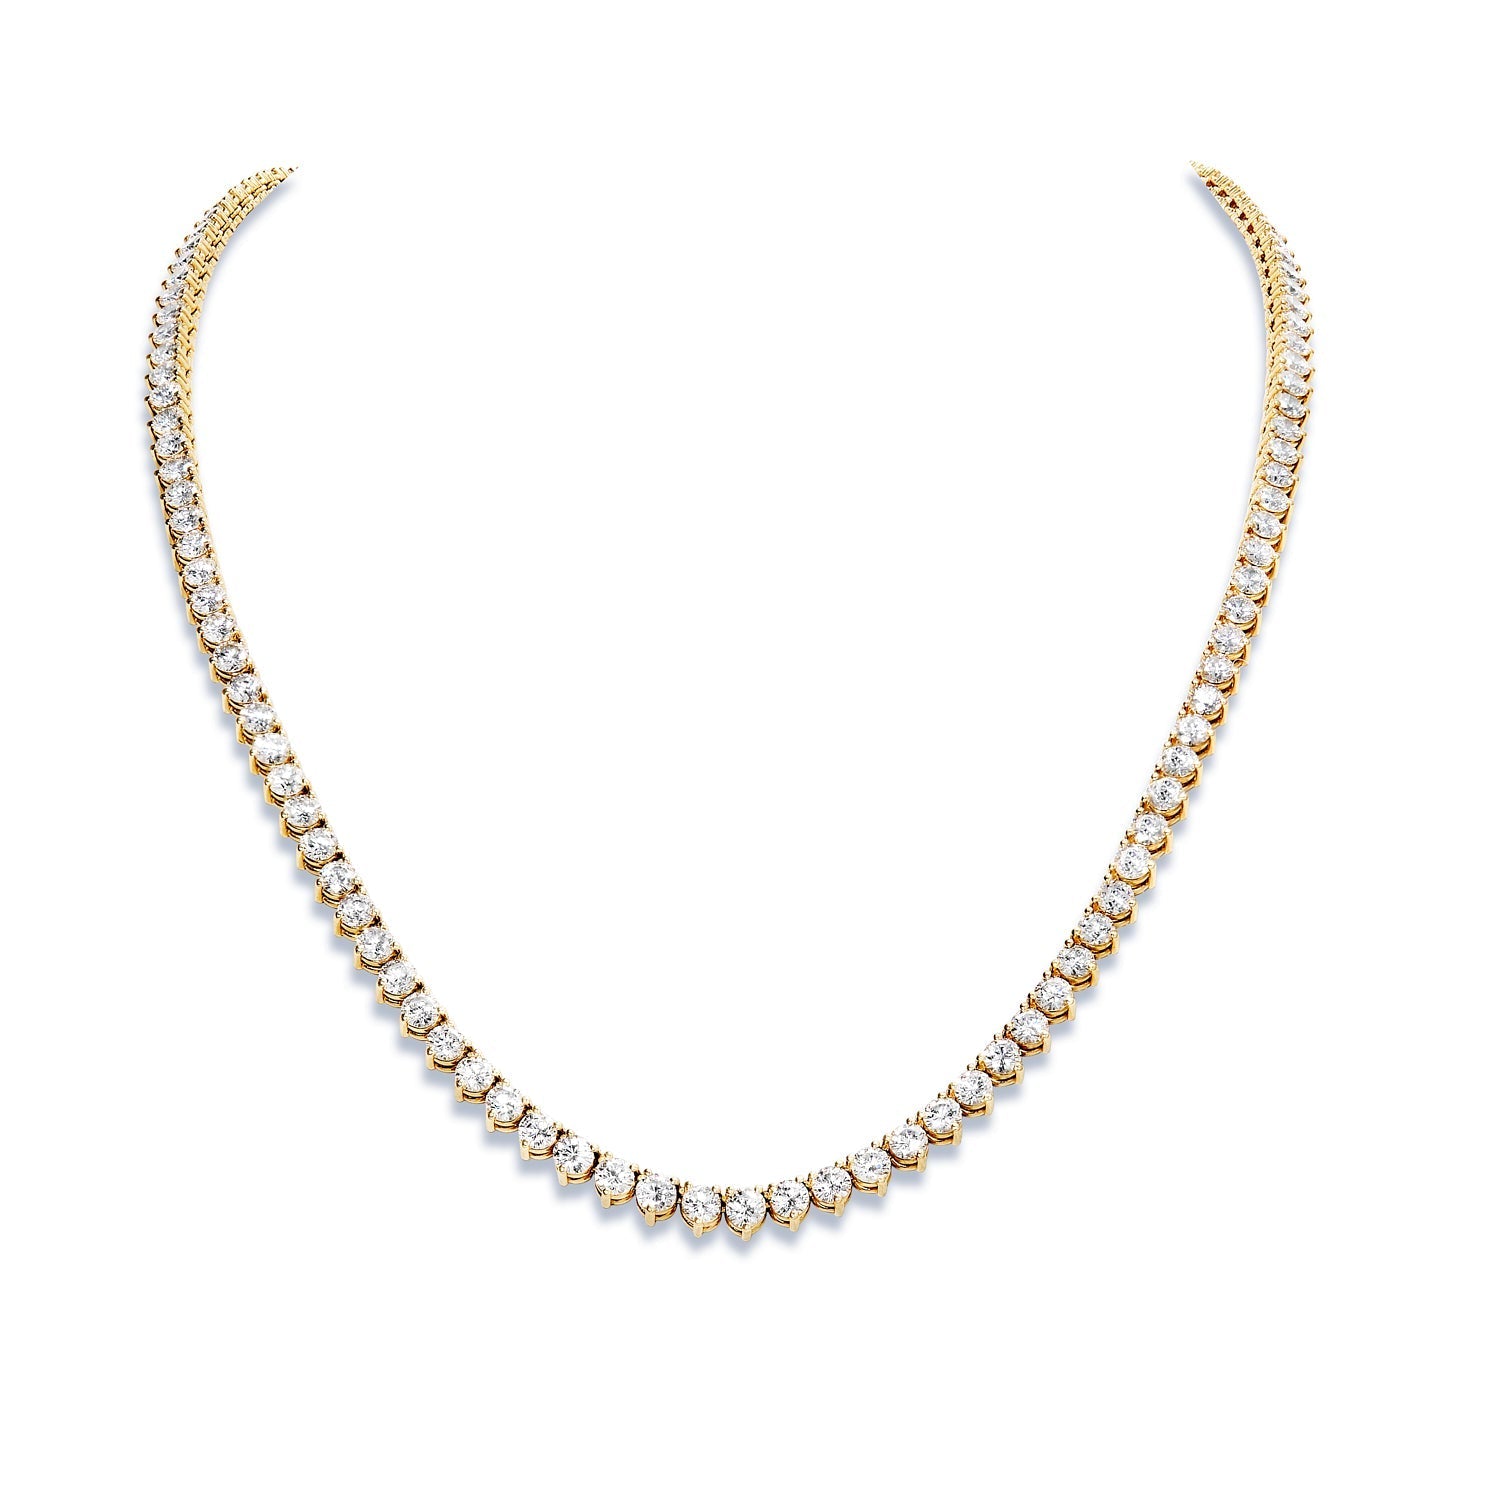 Amazon.com: Solid 14k White Gold 6 ctw Natural Diamond (F-G, VS1-VS2)  Dotted Eternity Tennis Necklace for Women 3.5 mm - Length 14 to 18 Inches  available - Handmade in USA - April Birthstone : Handmade Products